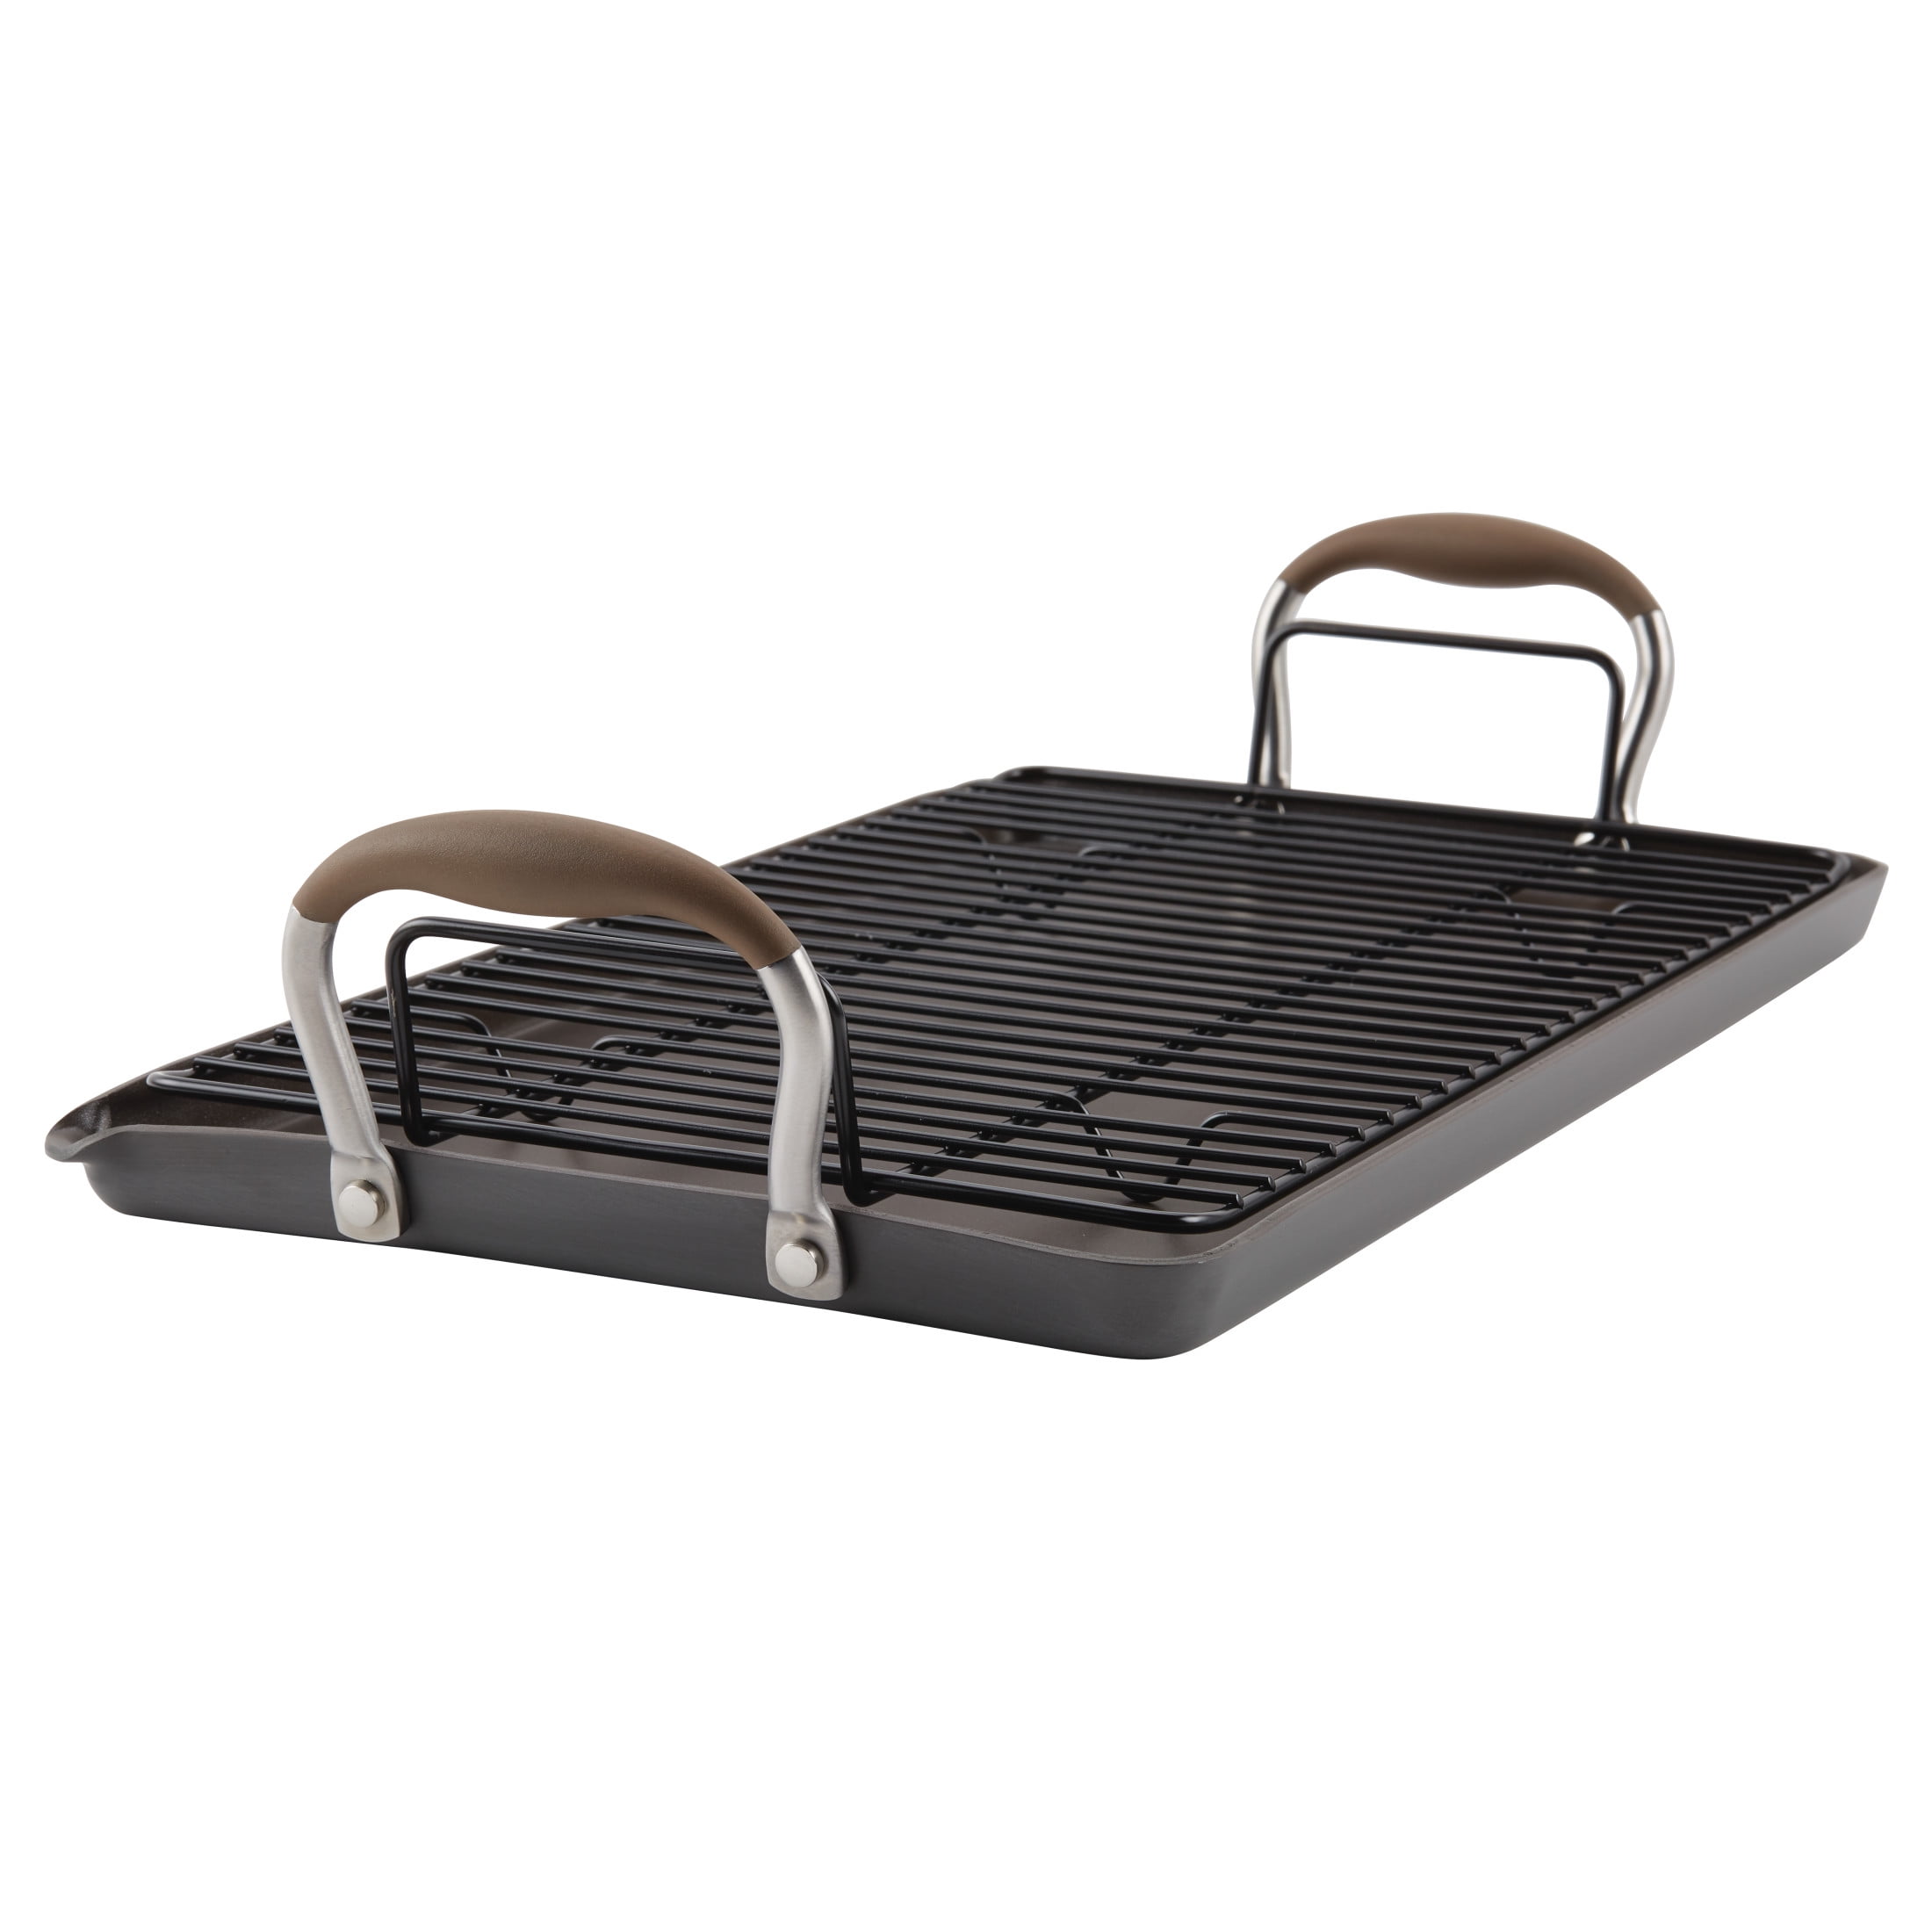 10 x 18 Double Burner Griddle with Multi-Purpose Rack